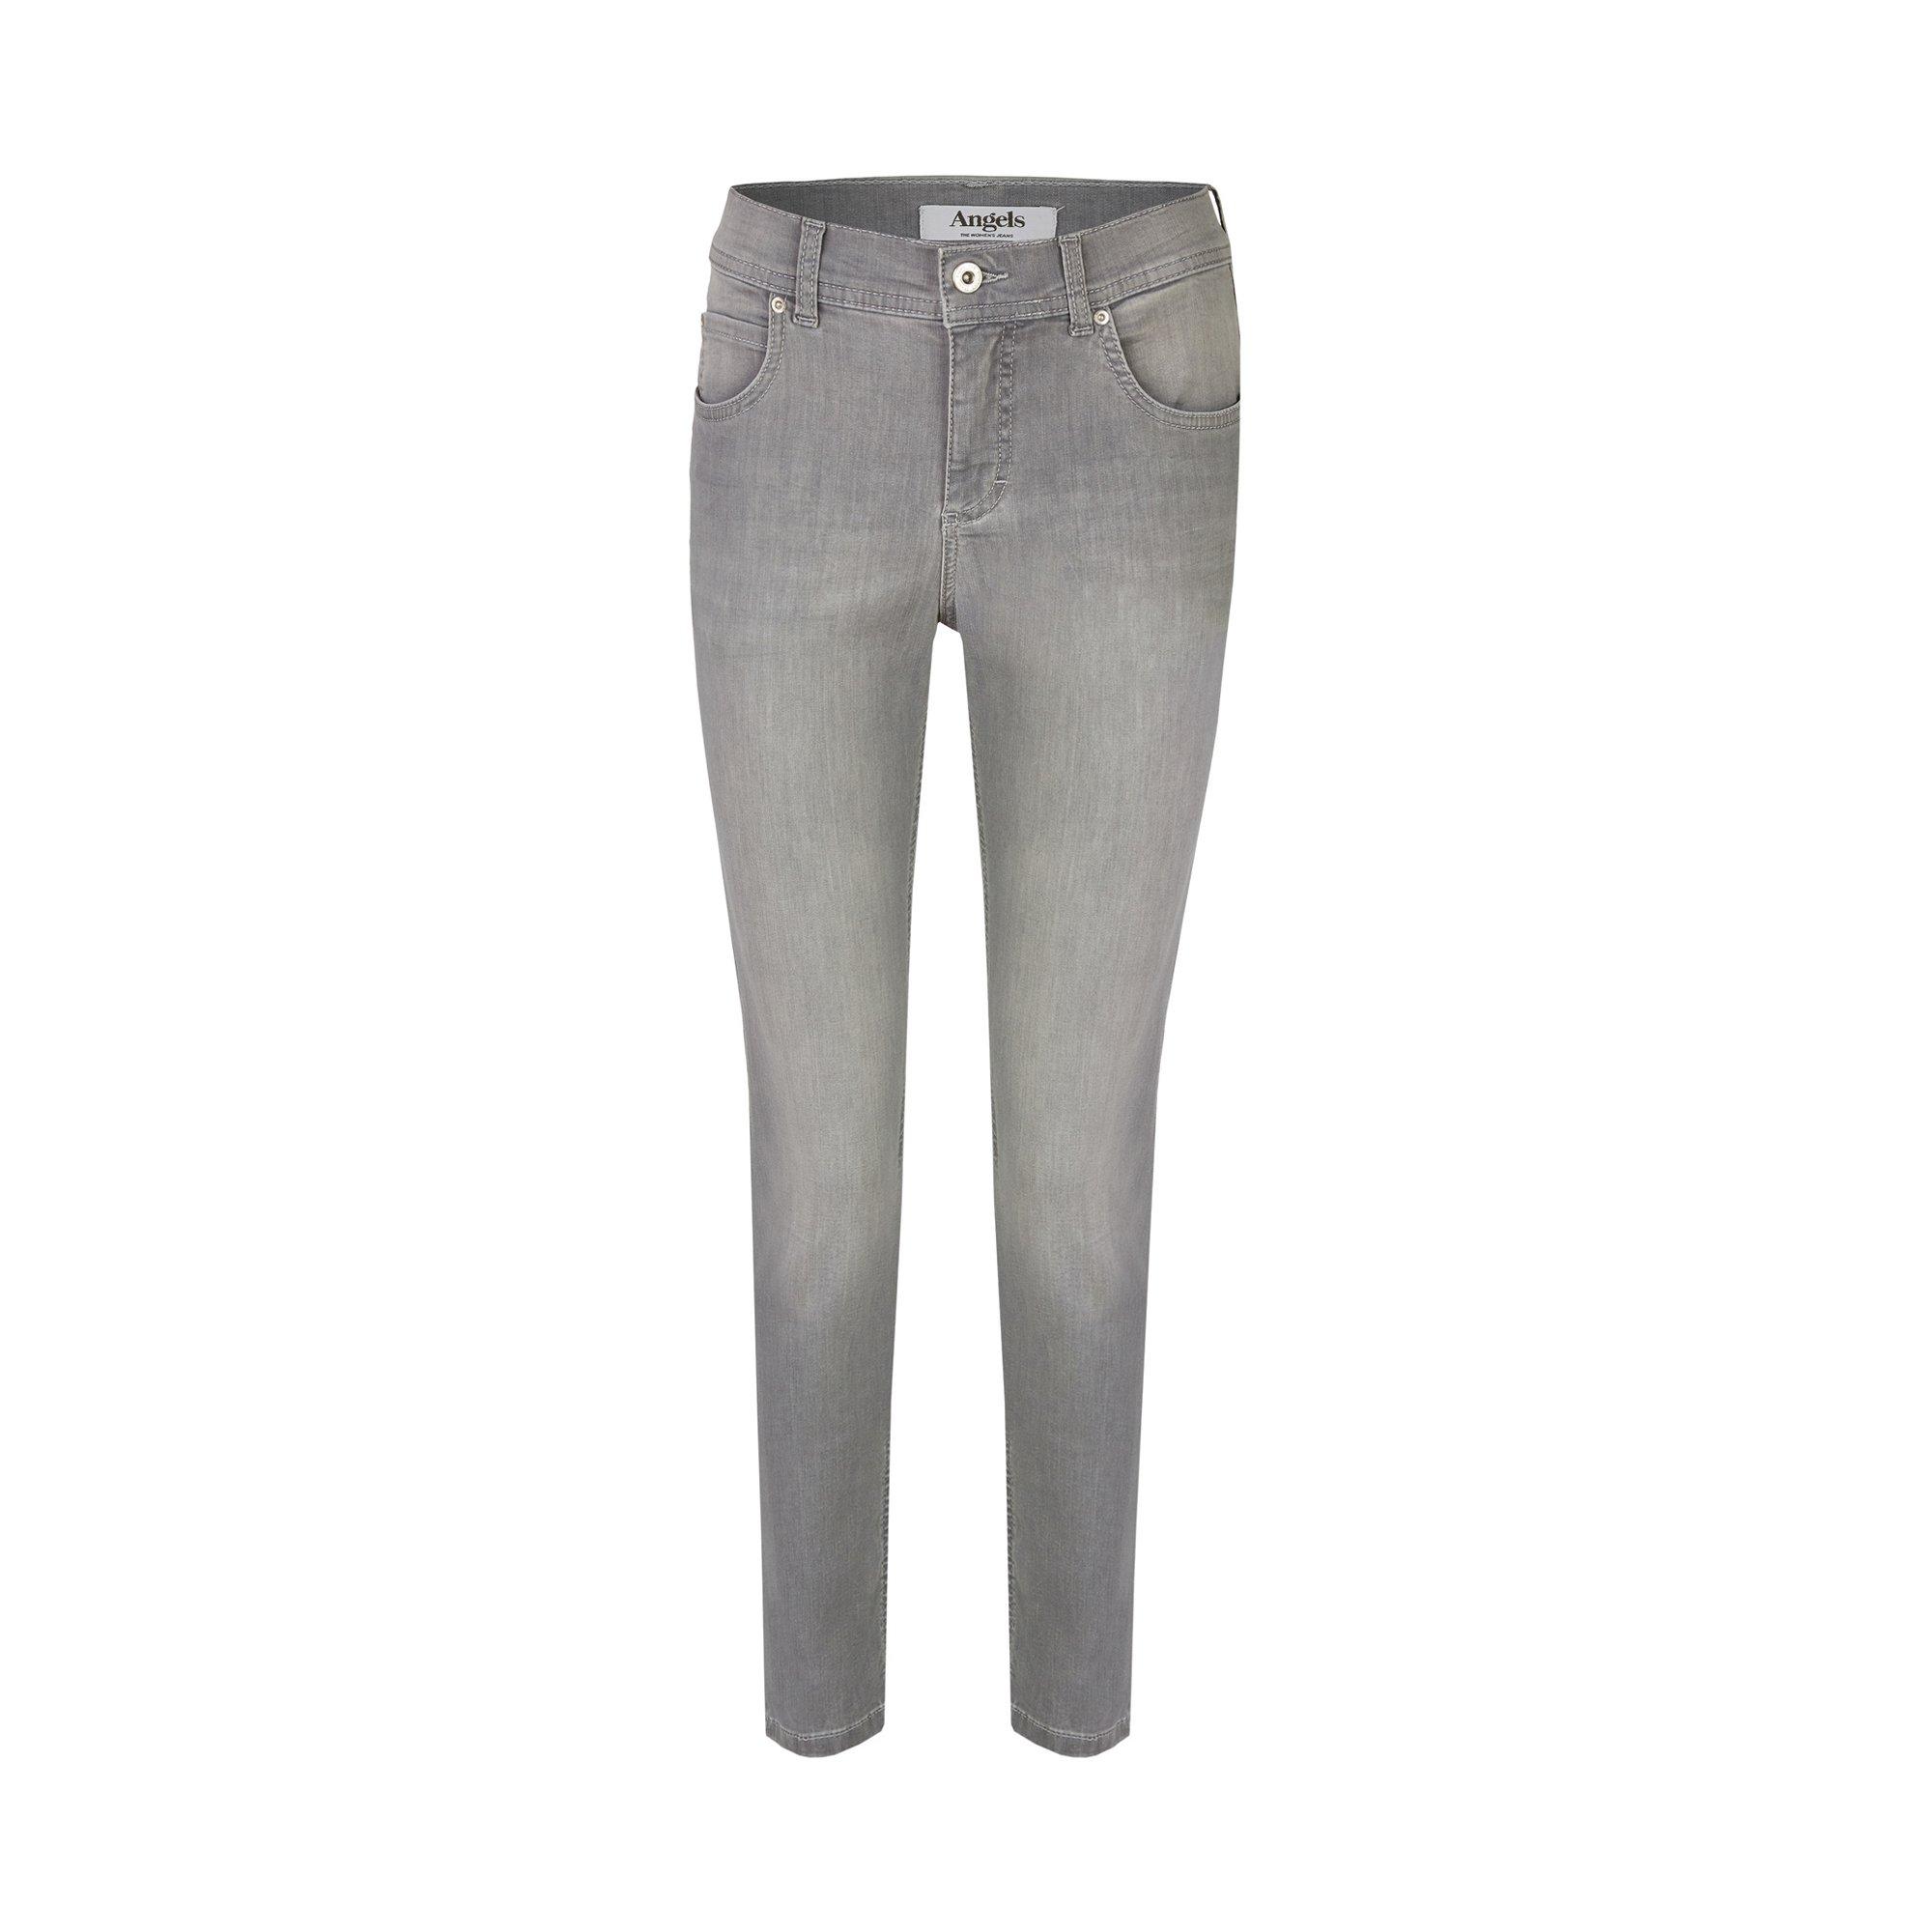 Image of ANGELS Ornella ankle Jeans, Skinny Fit - 34